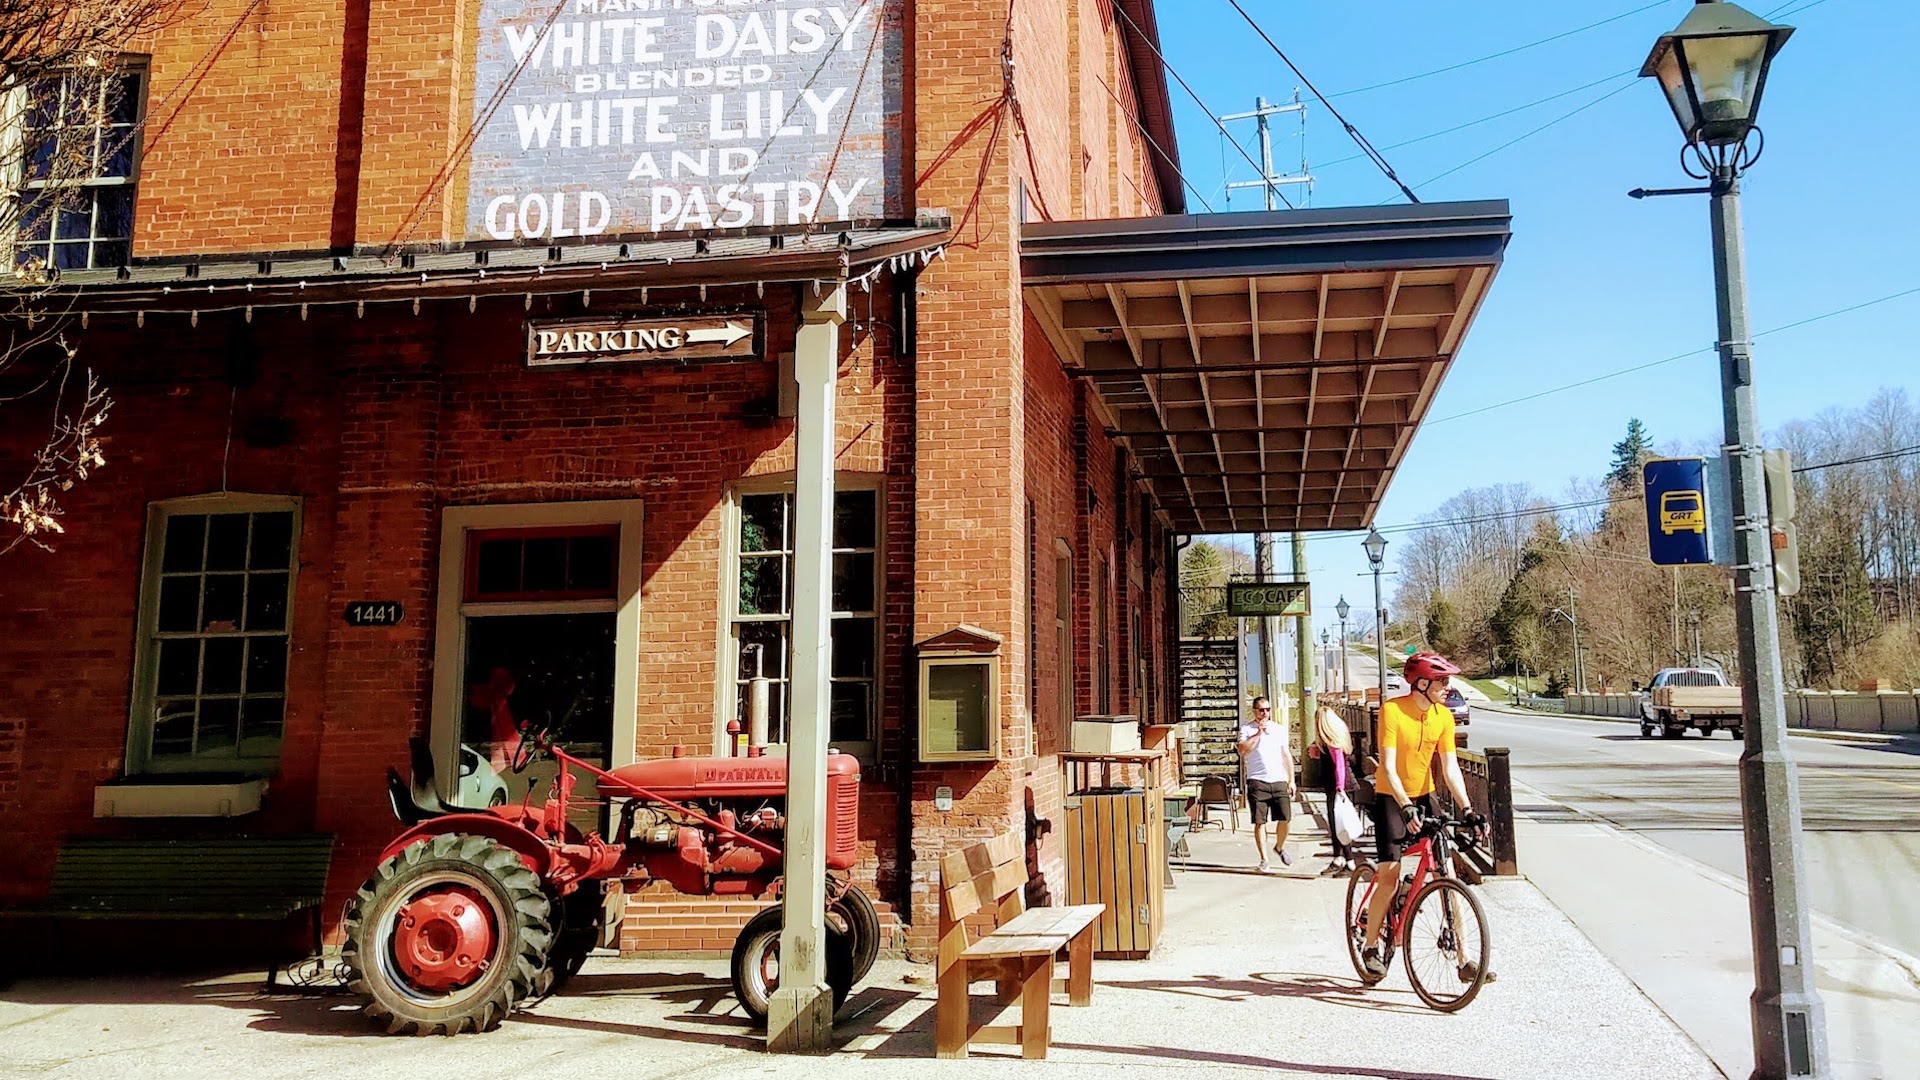 A few of the corner of a red brick building. In the left foreground there's a red farm tractor. In the right foreground there's a person on a bike.